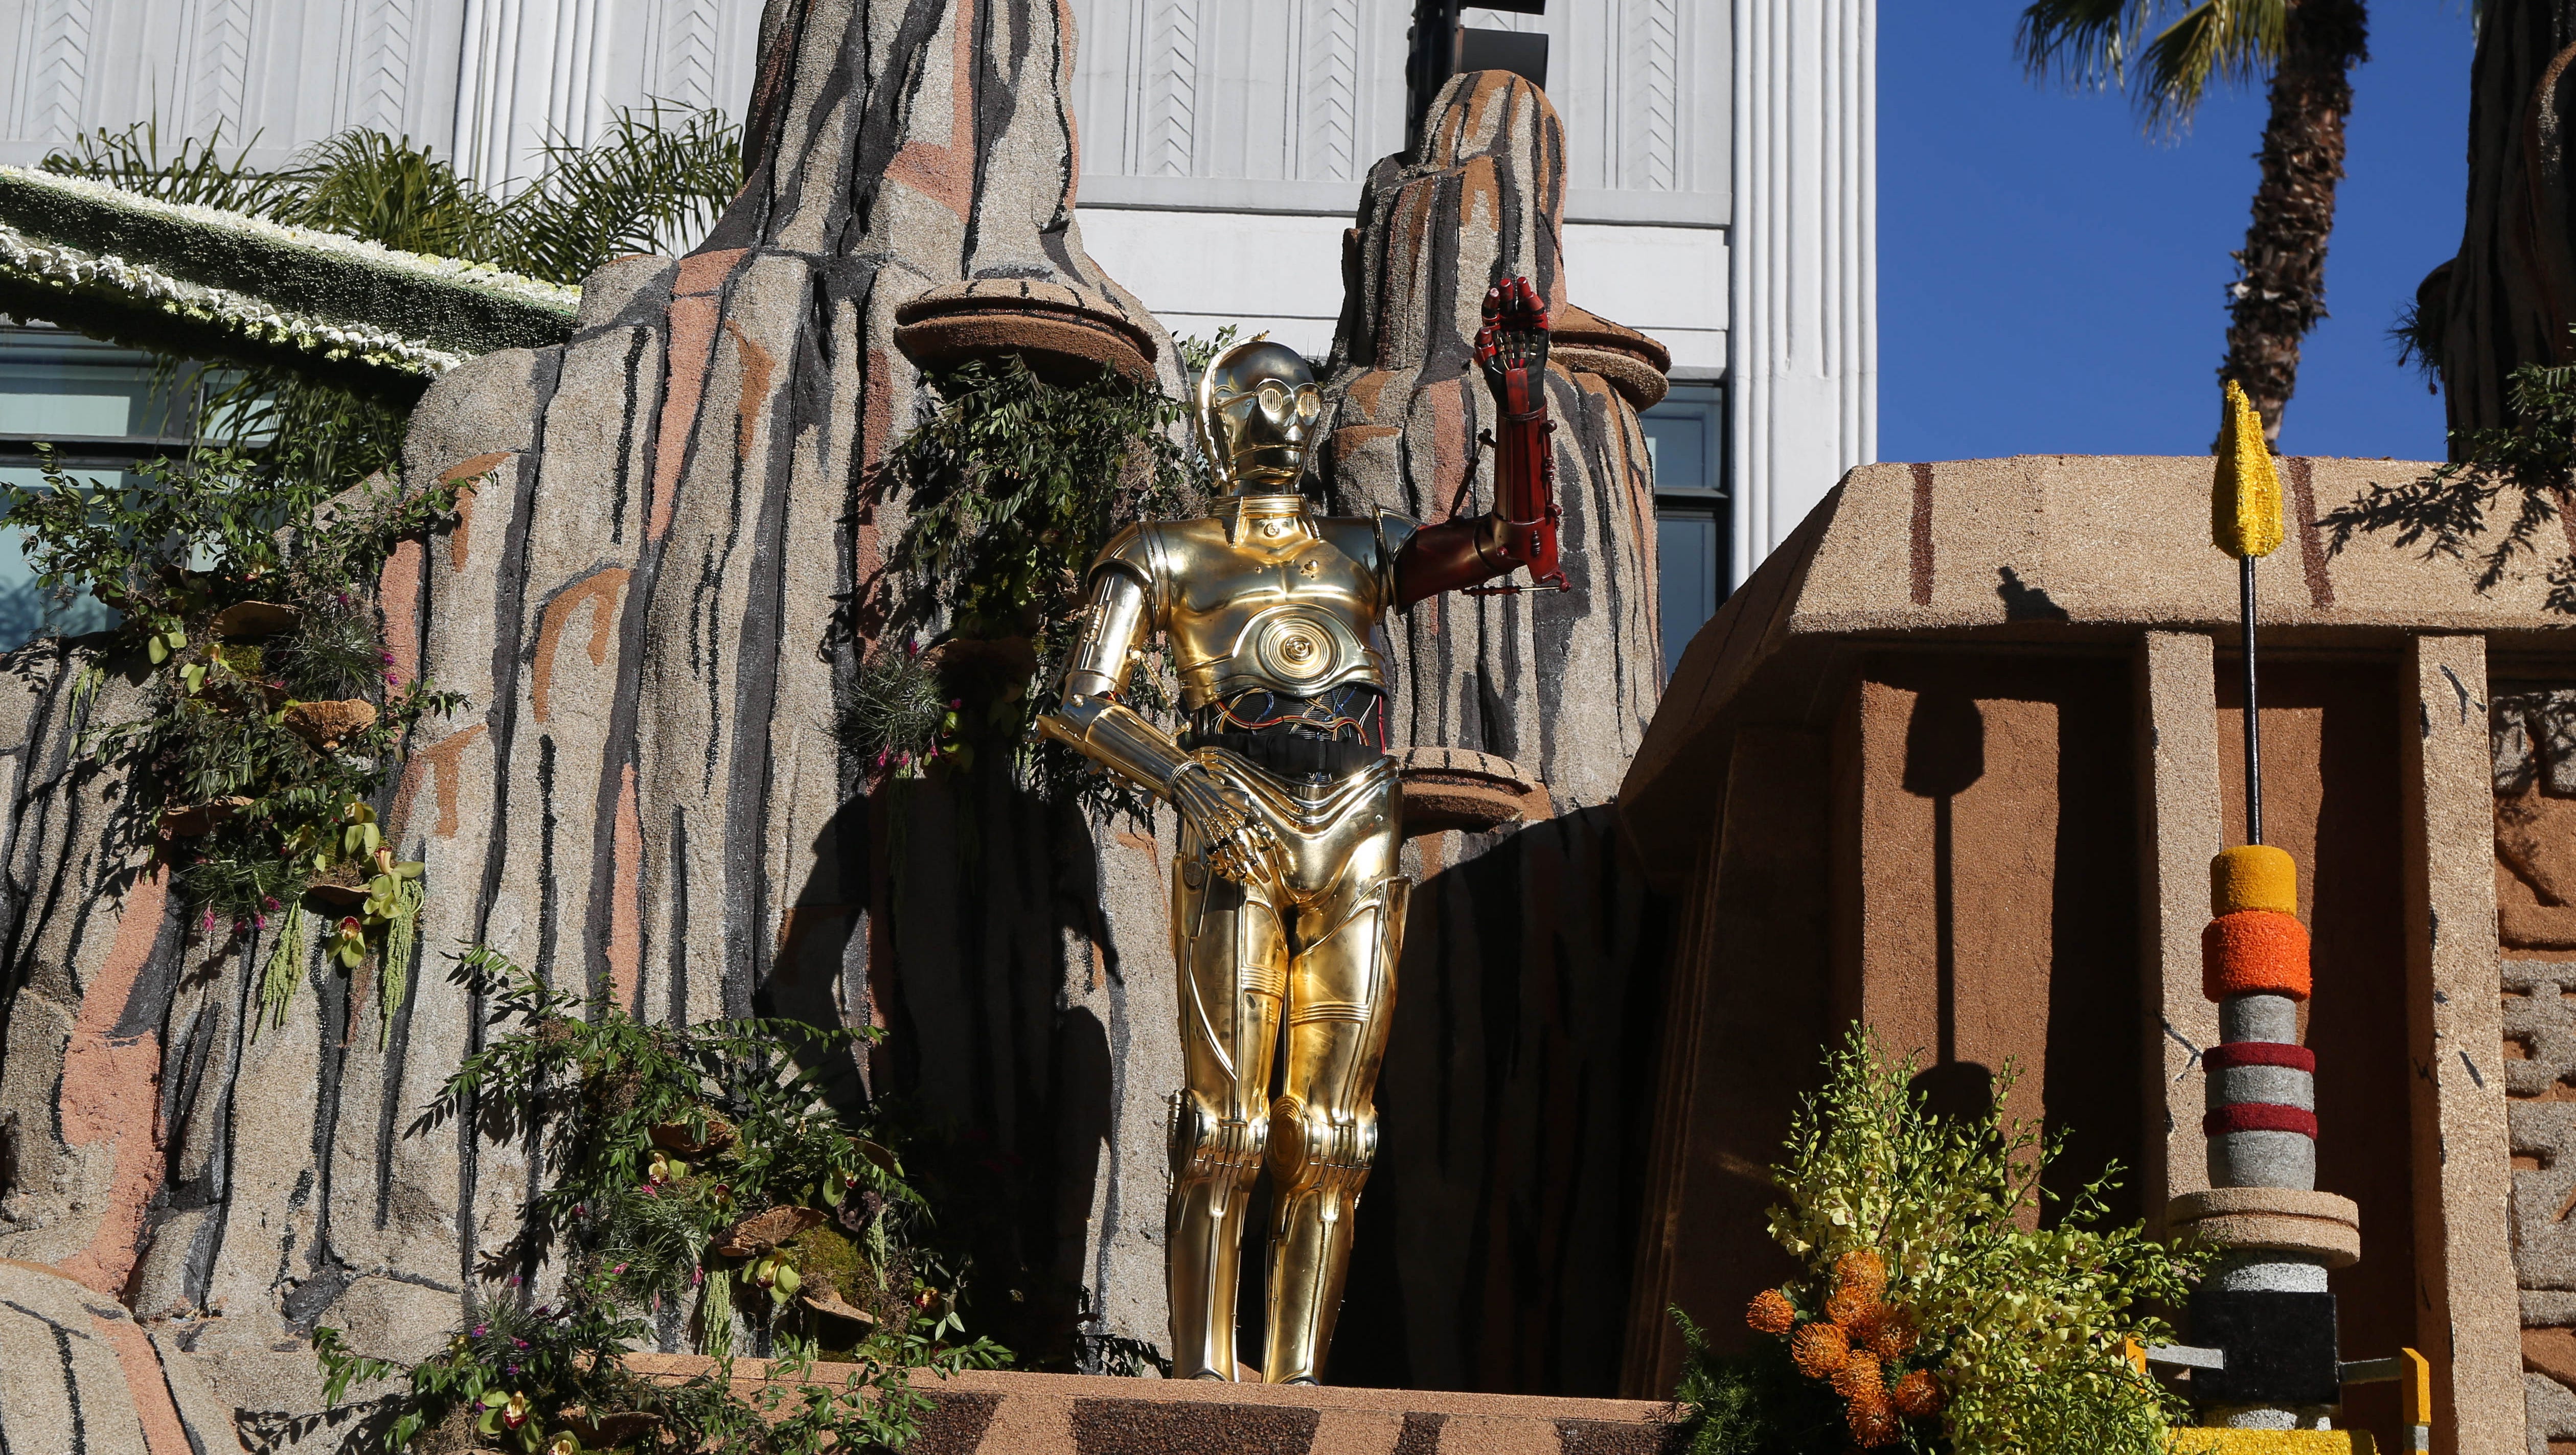 C-3P0 rides the Disney float on Friday, Jan. 1, 2016, during the 2016 Tournament of Roses Parade in Pasadena, Calif.